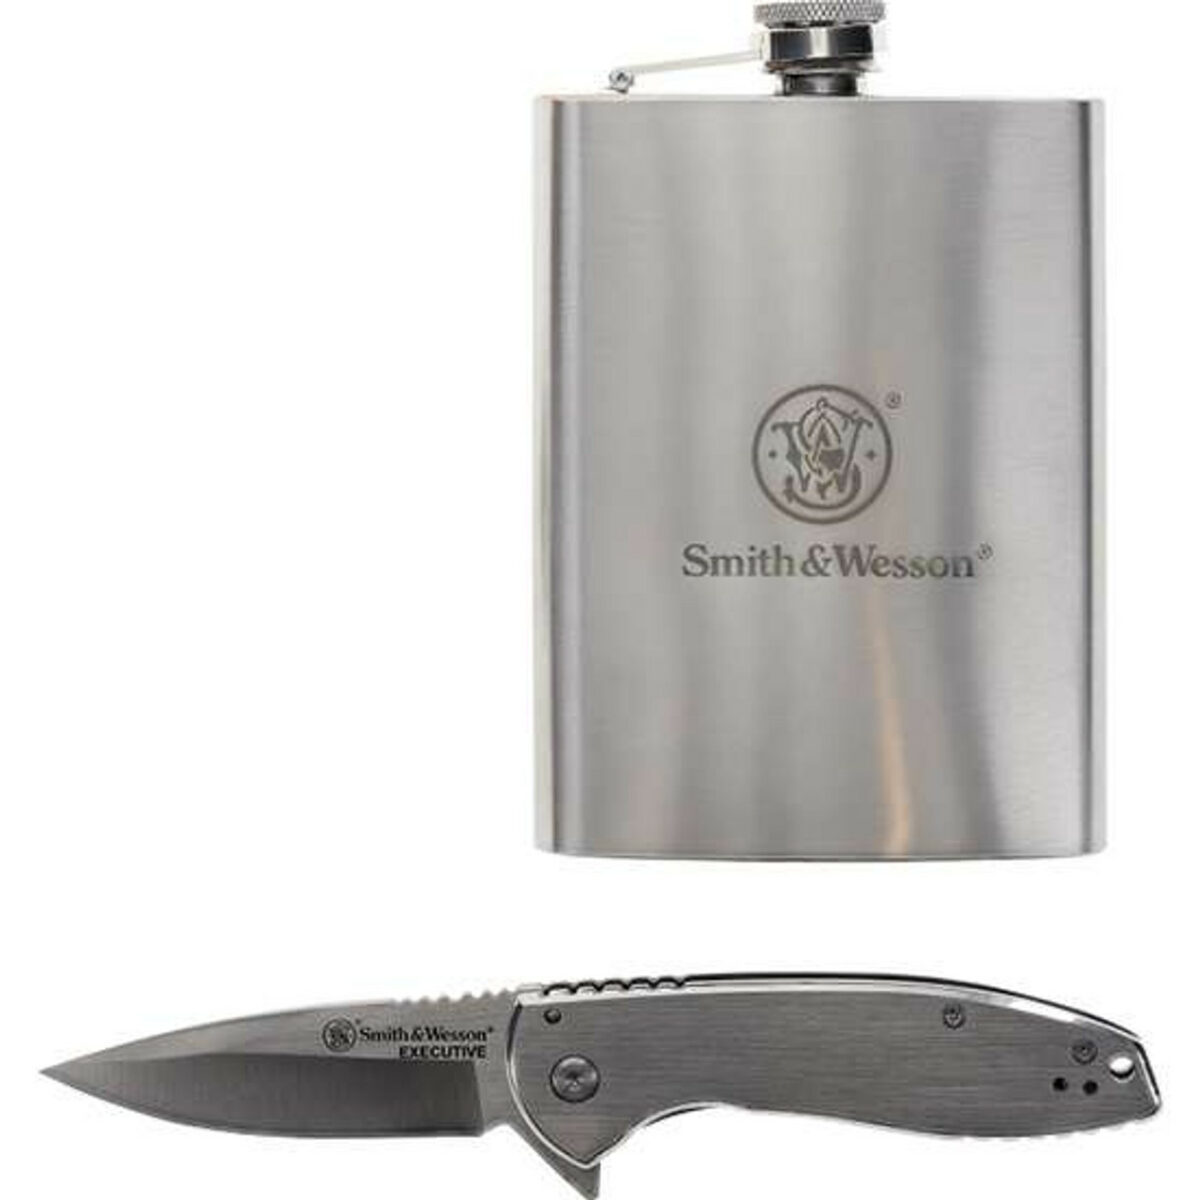 Smith & Wesson Executive Liner Lock & Flask Gift Set